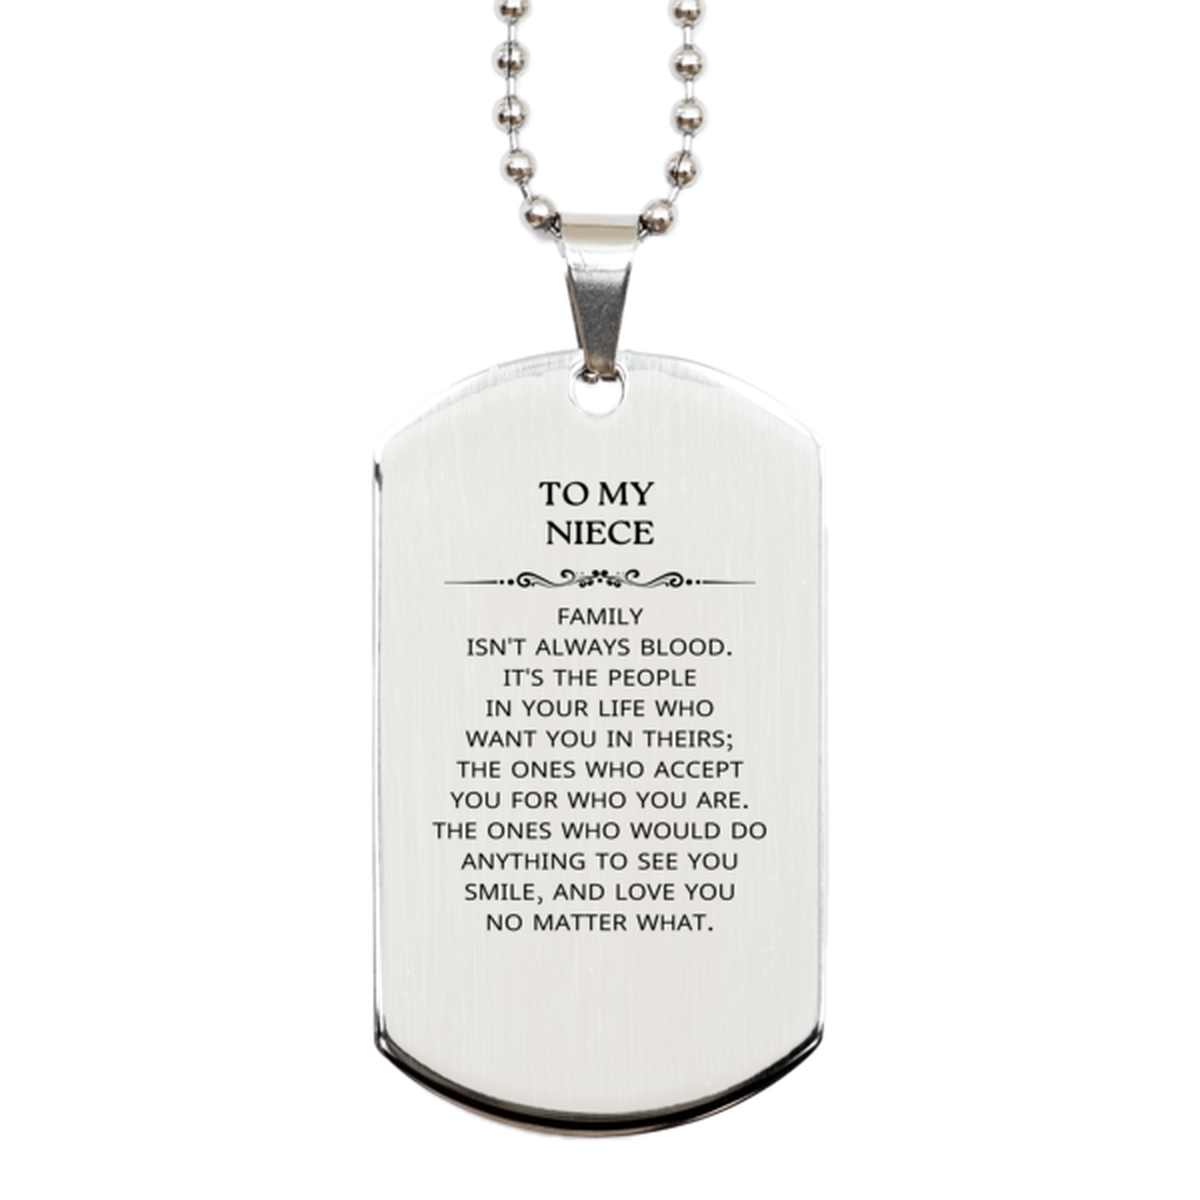 To My Niece Gifts, Family isn't always blood, Niece Silver Dog Tag, Birthday Christmas Unique Present For Niece